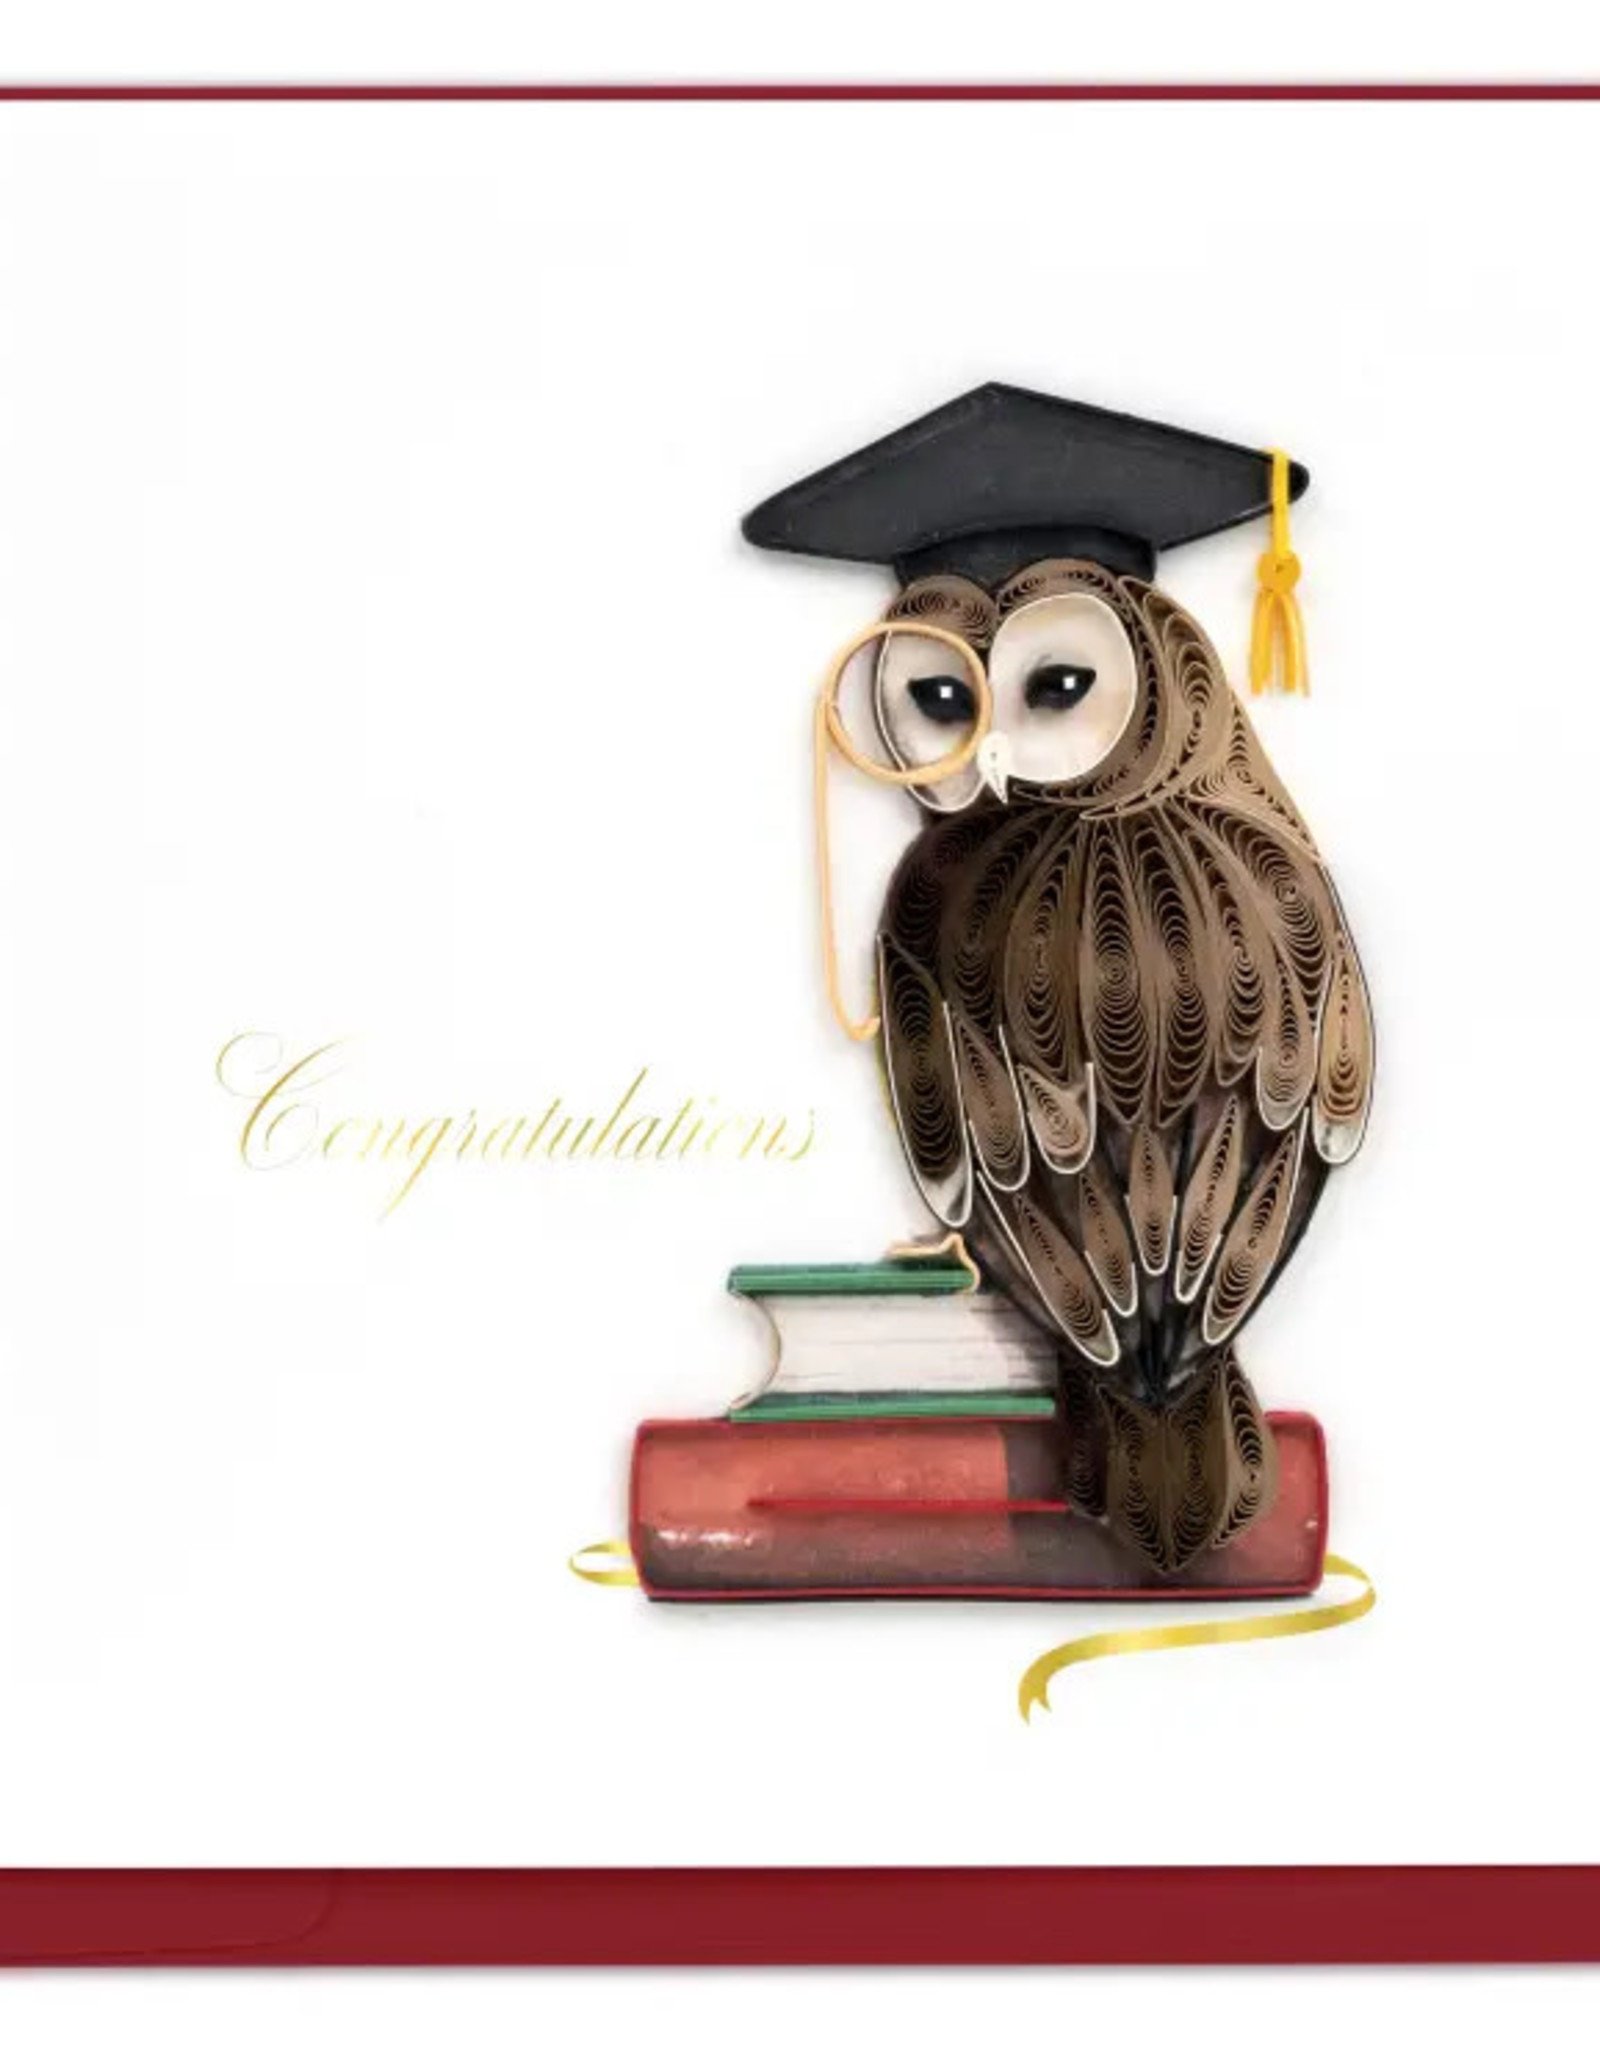 Quilling Card Quilled Graduation Owl Card